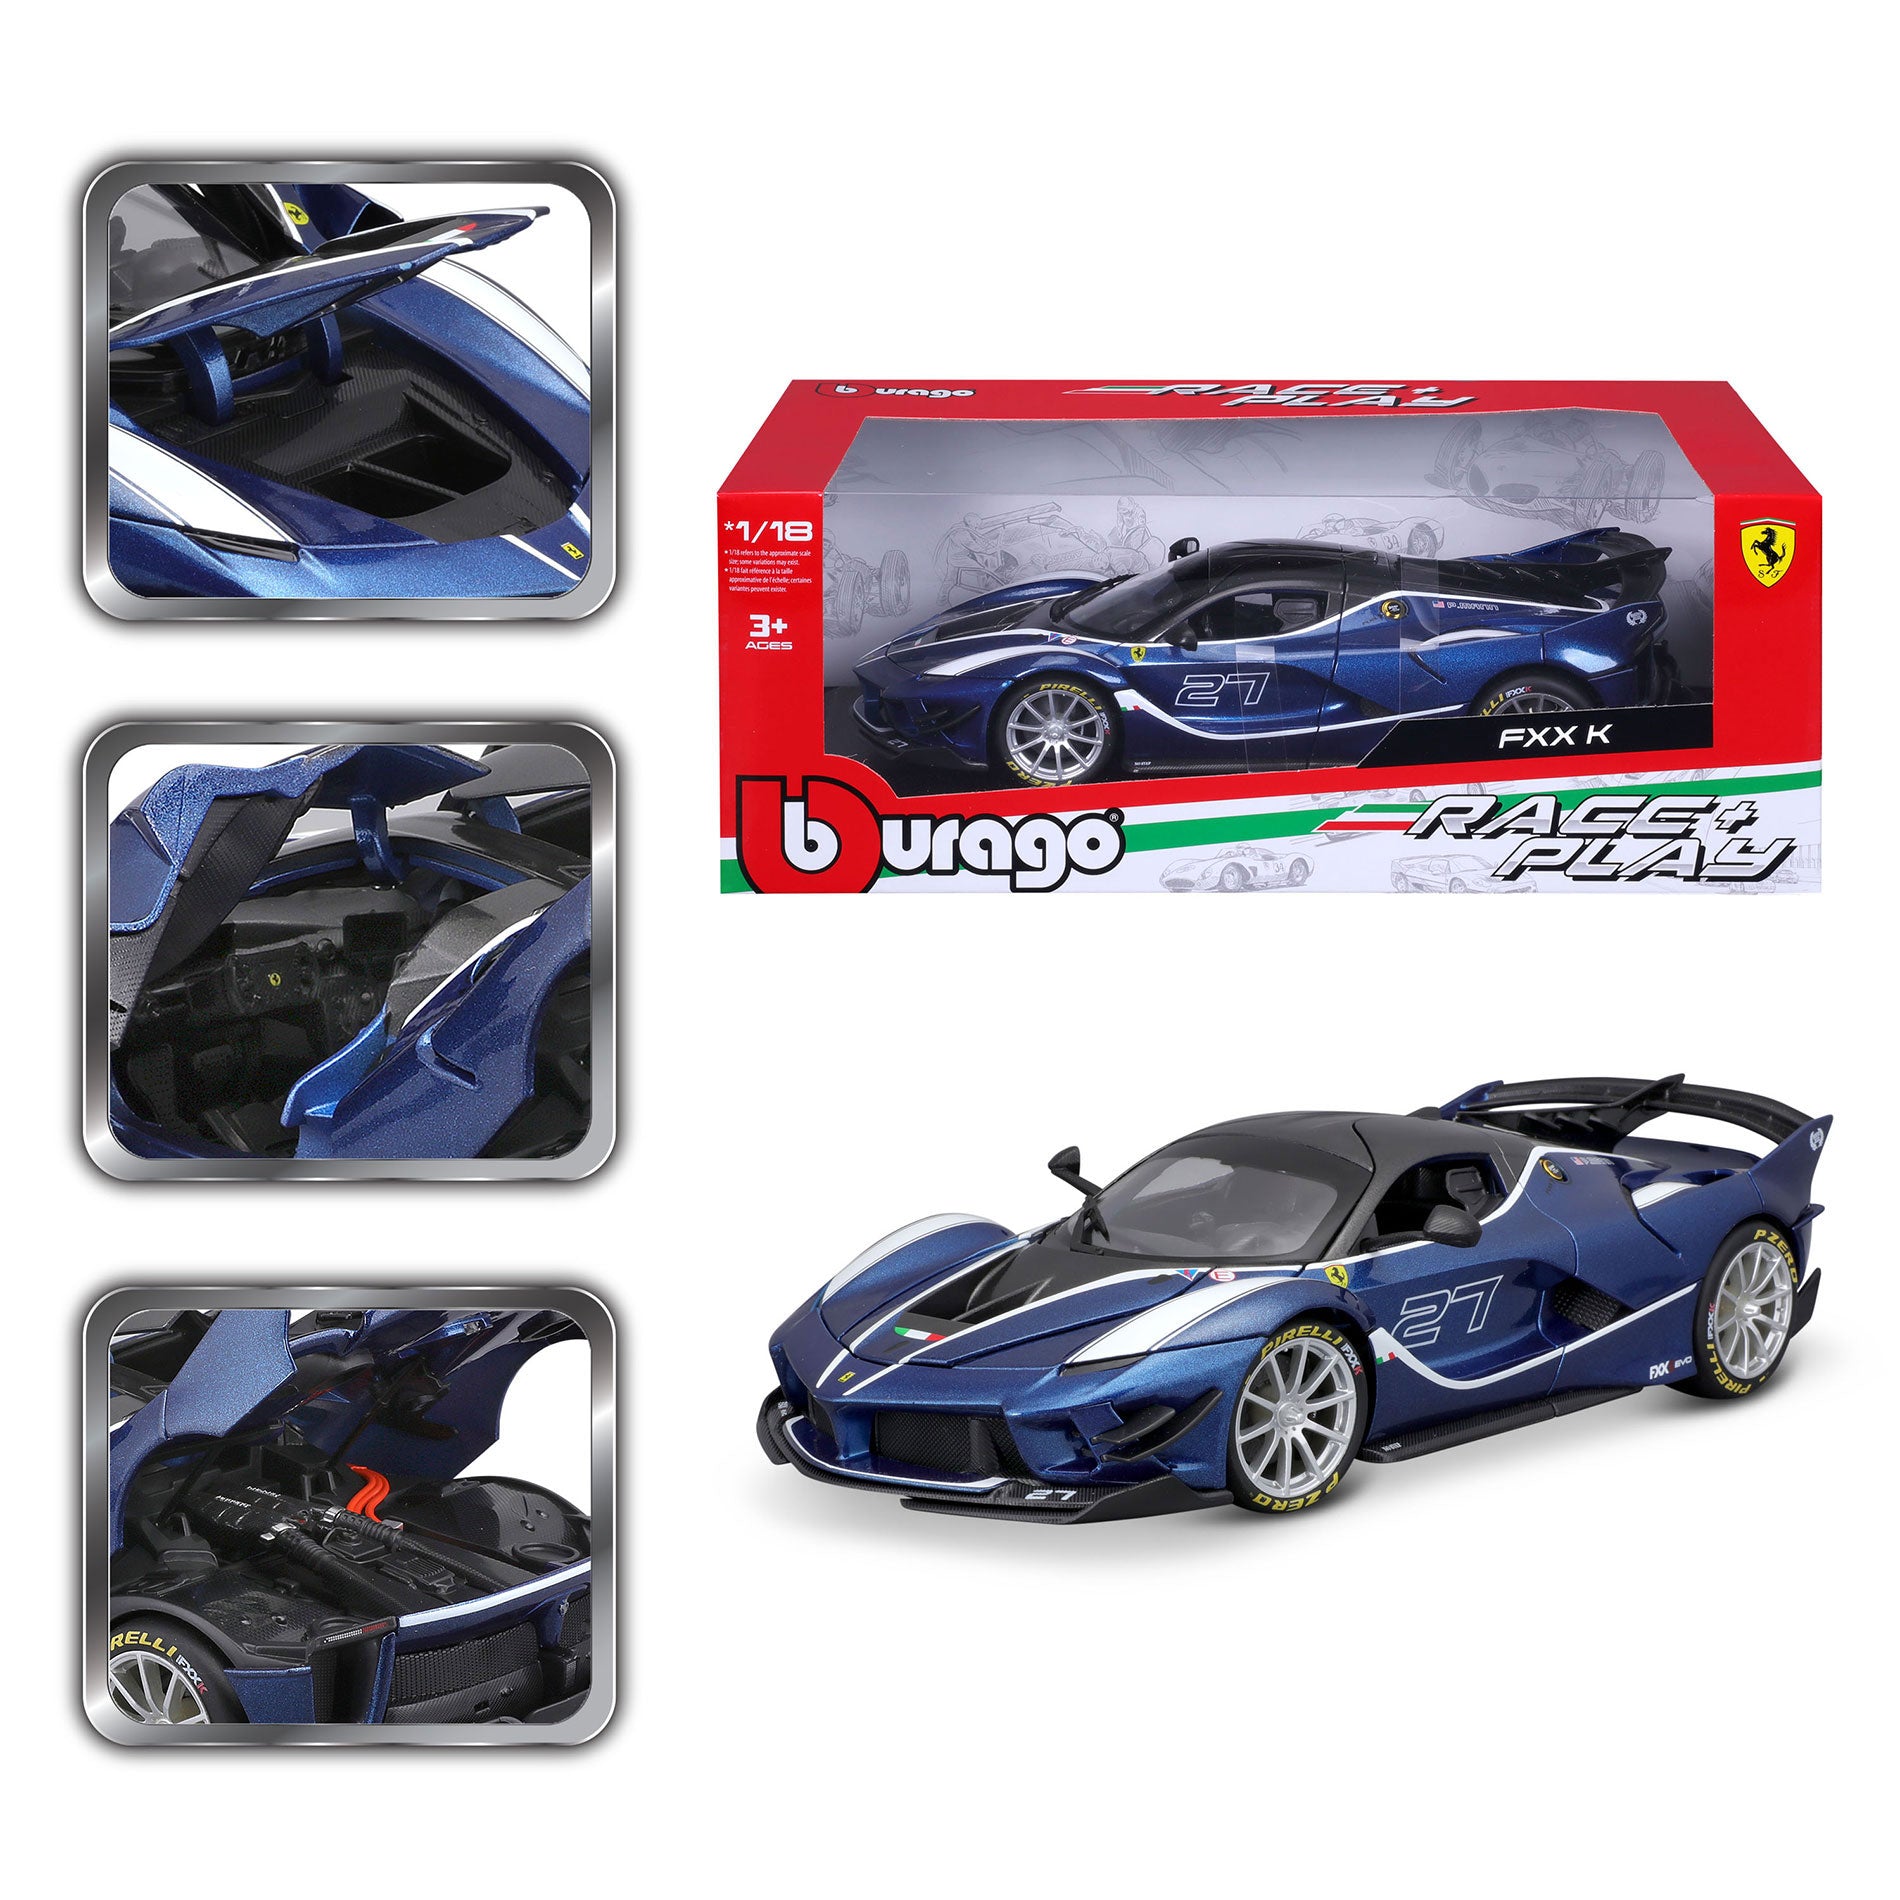 Ferrari R&P 1:43 with Pull-Back, WB, 12er Display - 1:43 Race & Play  Edition - Bburago Ferrari Line - Modelling & Technology - Brands & Products  